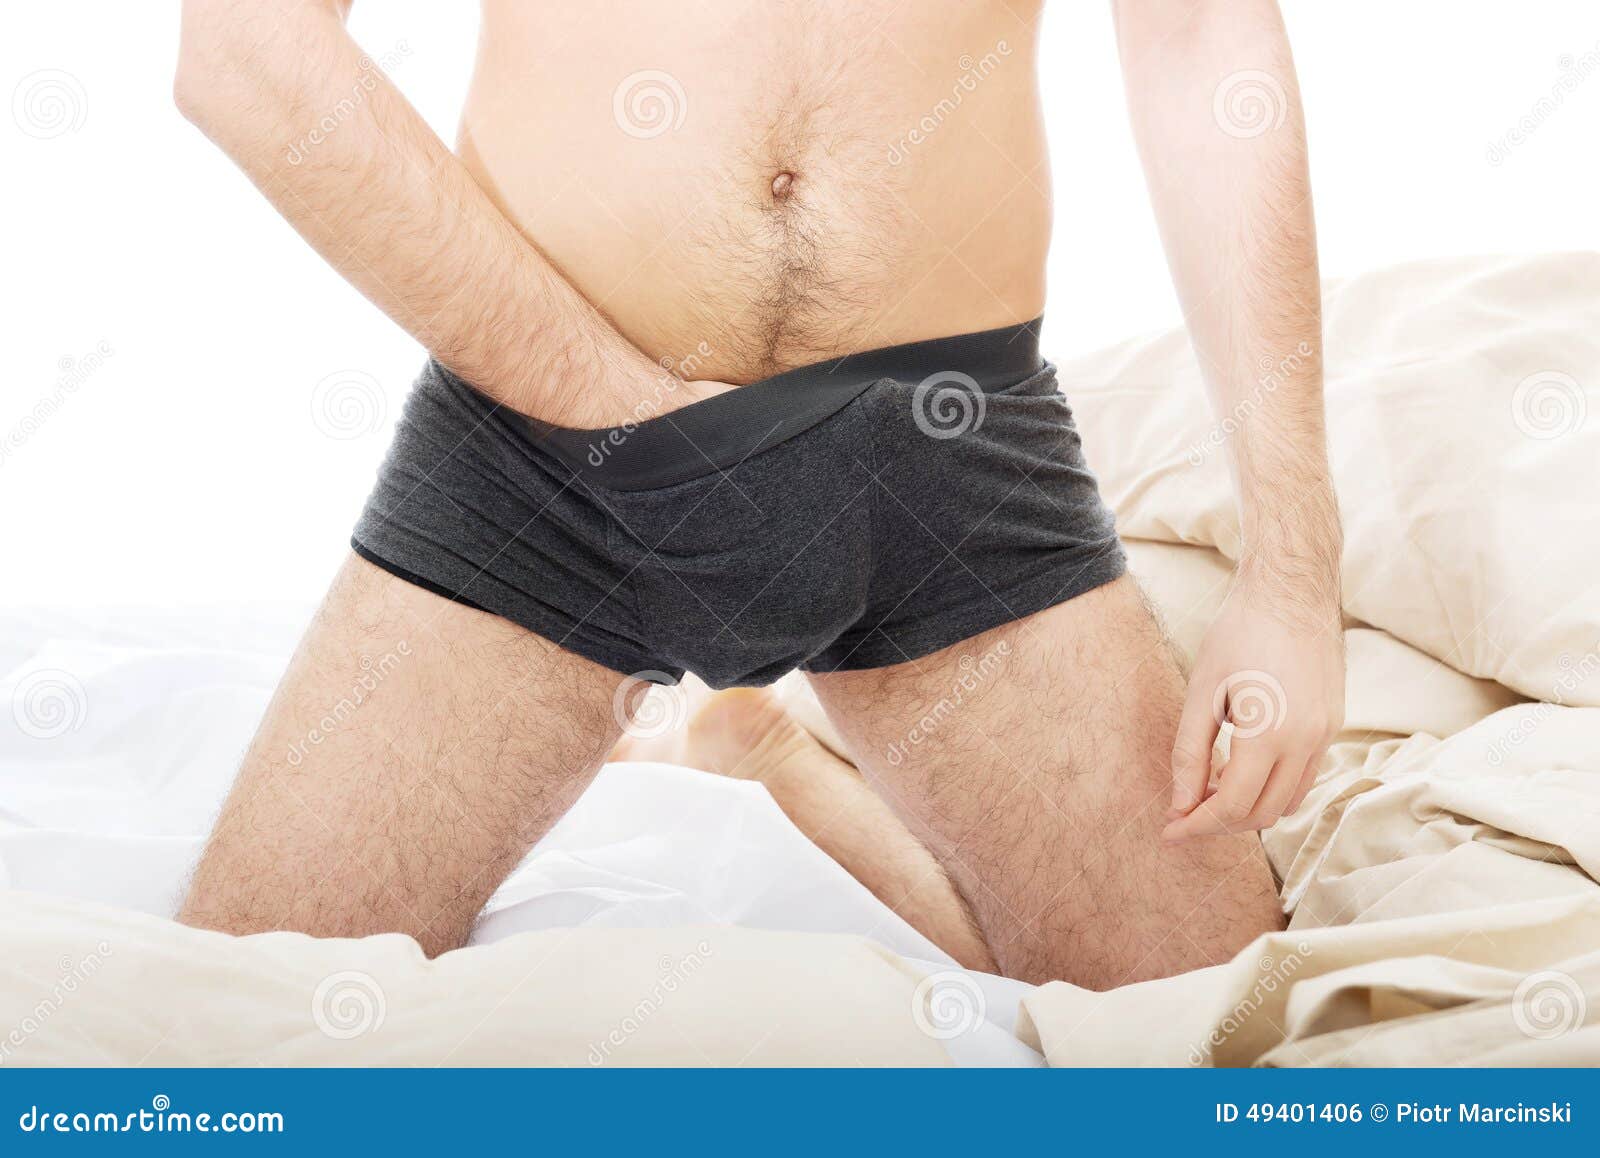 https://thumbs.dreamstime.com/z/playful-male-hand-panties-touching-his-49401406.jpg